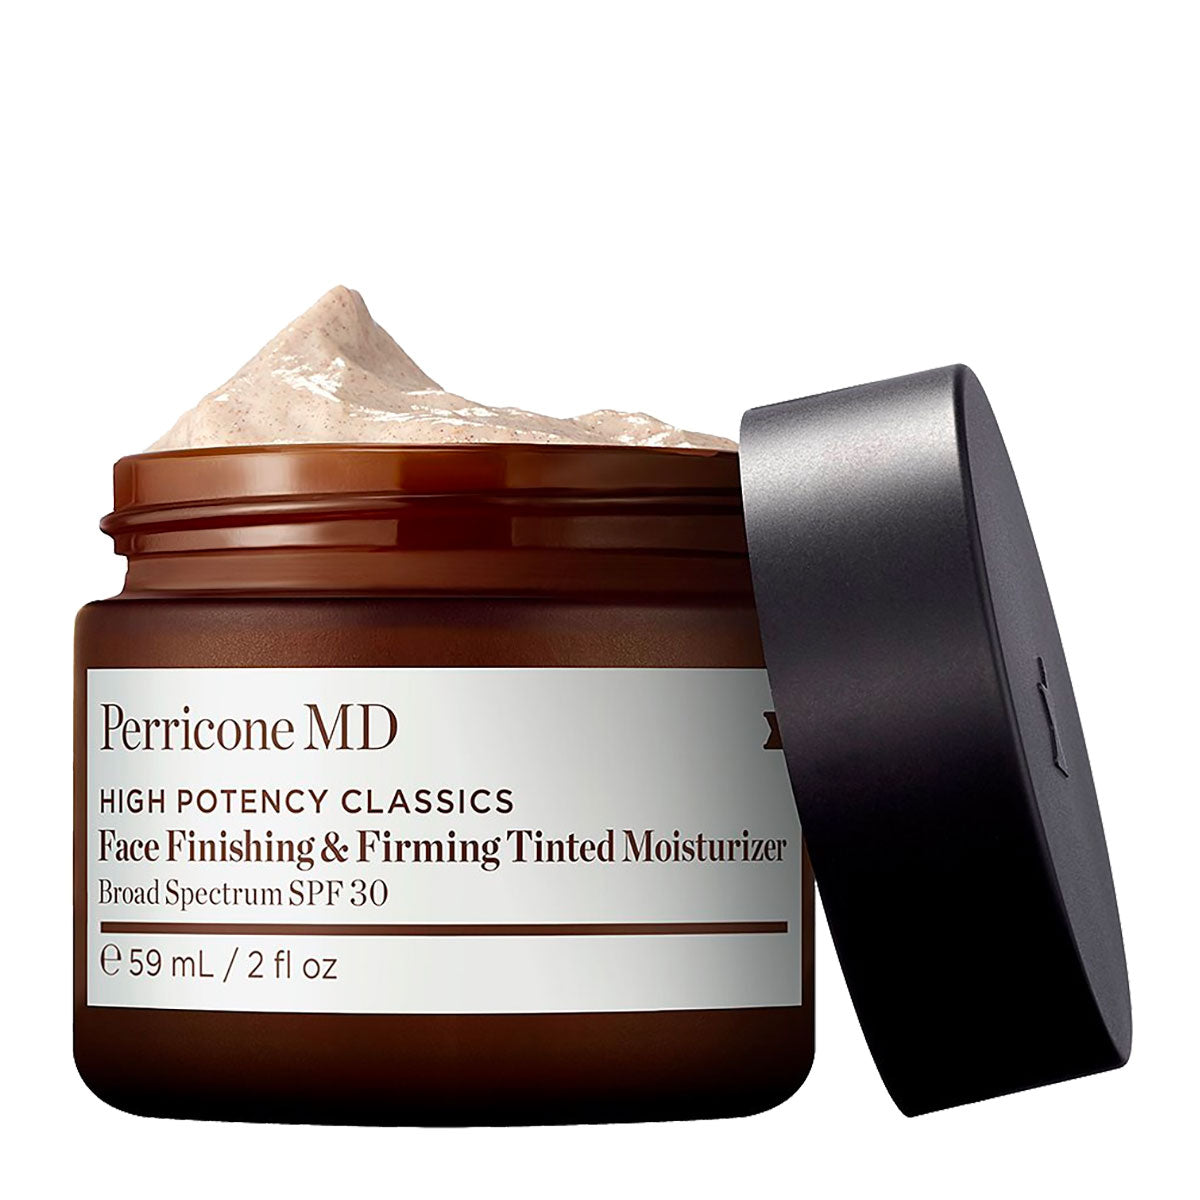 [03/24] Perricone MD High Face Finishing & Firming Tinted Moisturizer Mineral Sunscreen SPF 30 59 ml